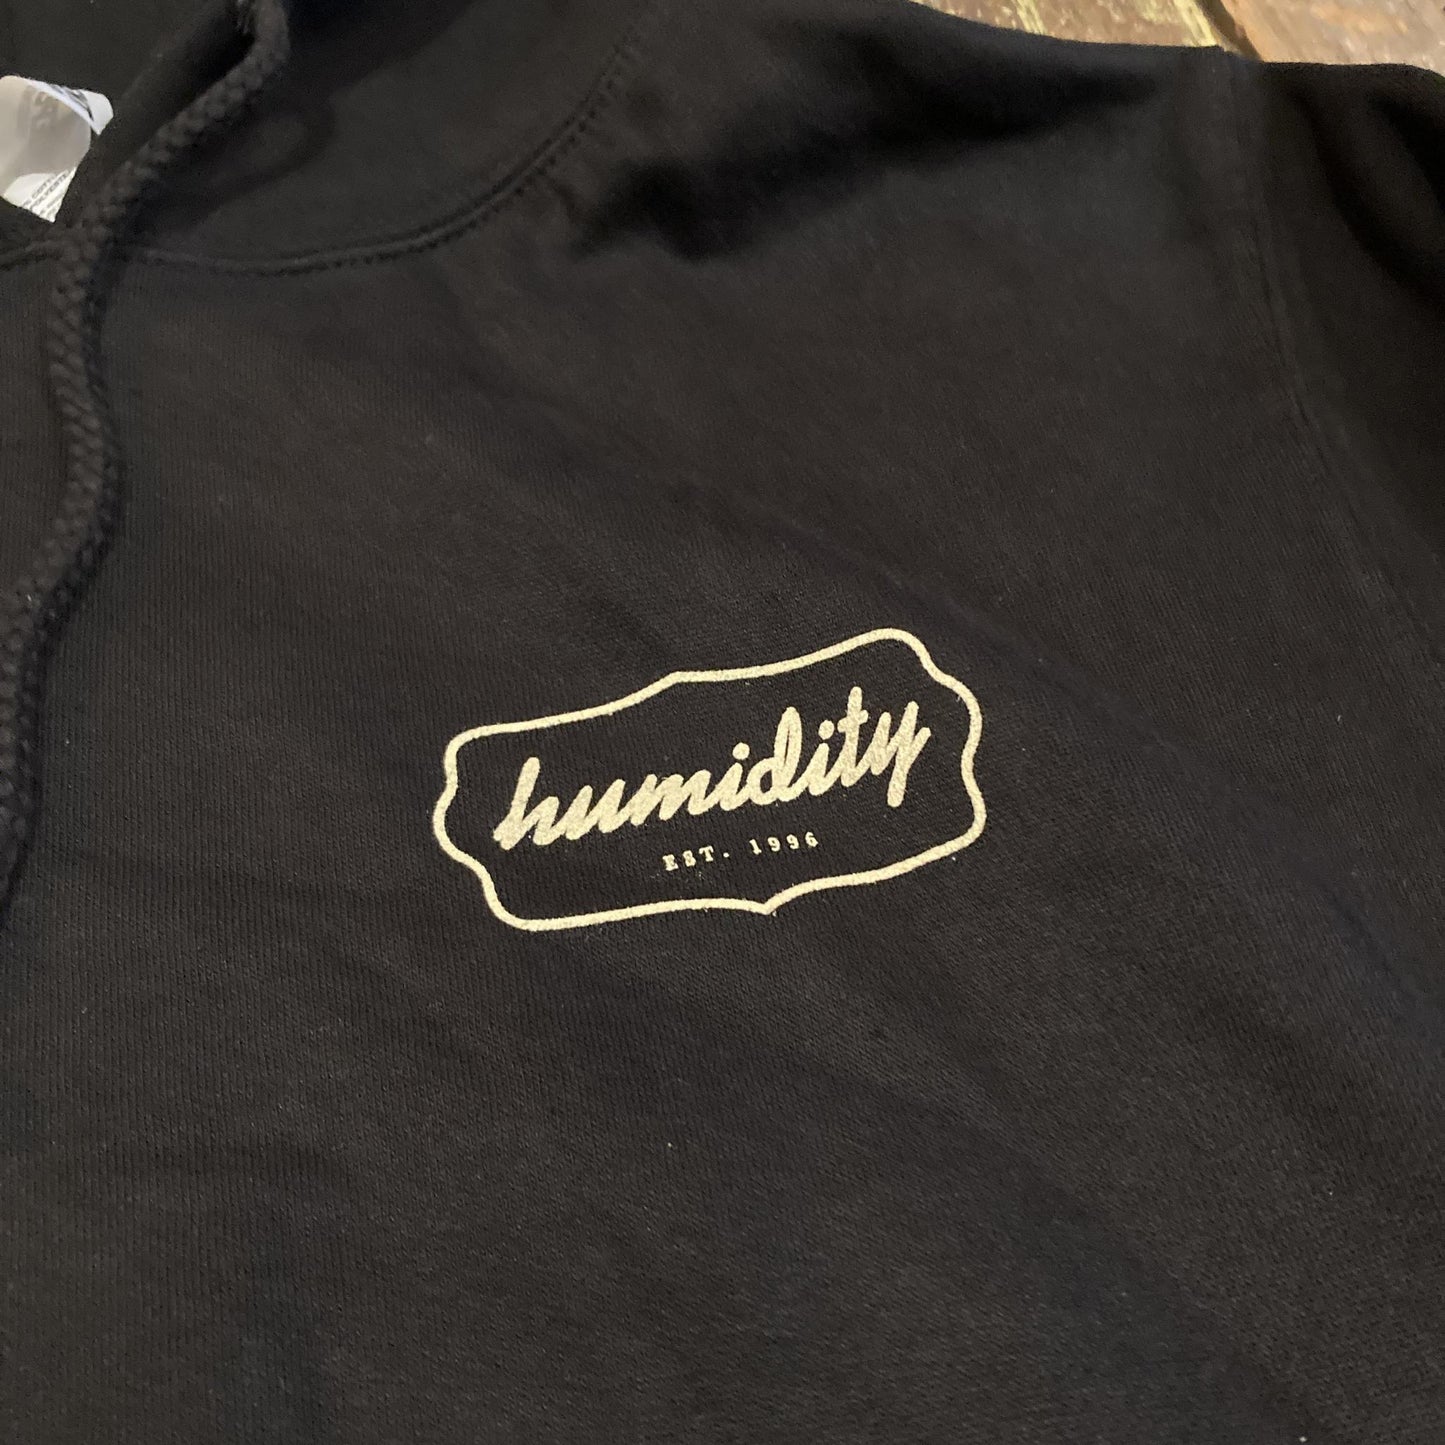 Humidity Badge Hoodie with the cream color badge